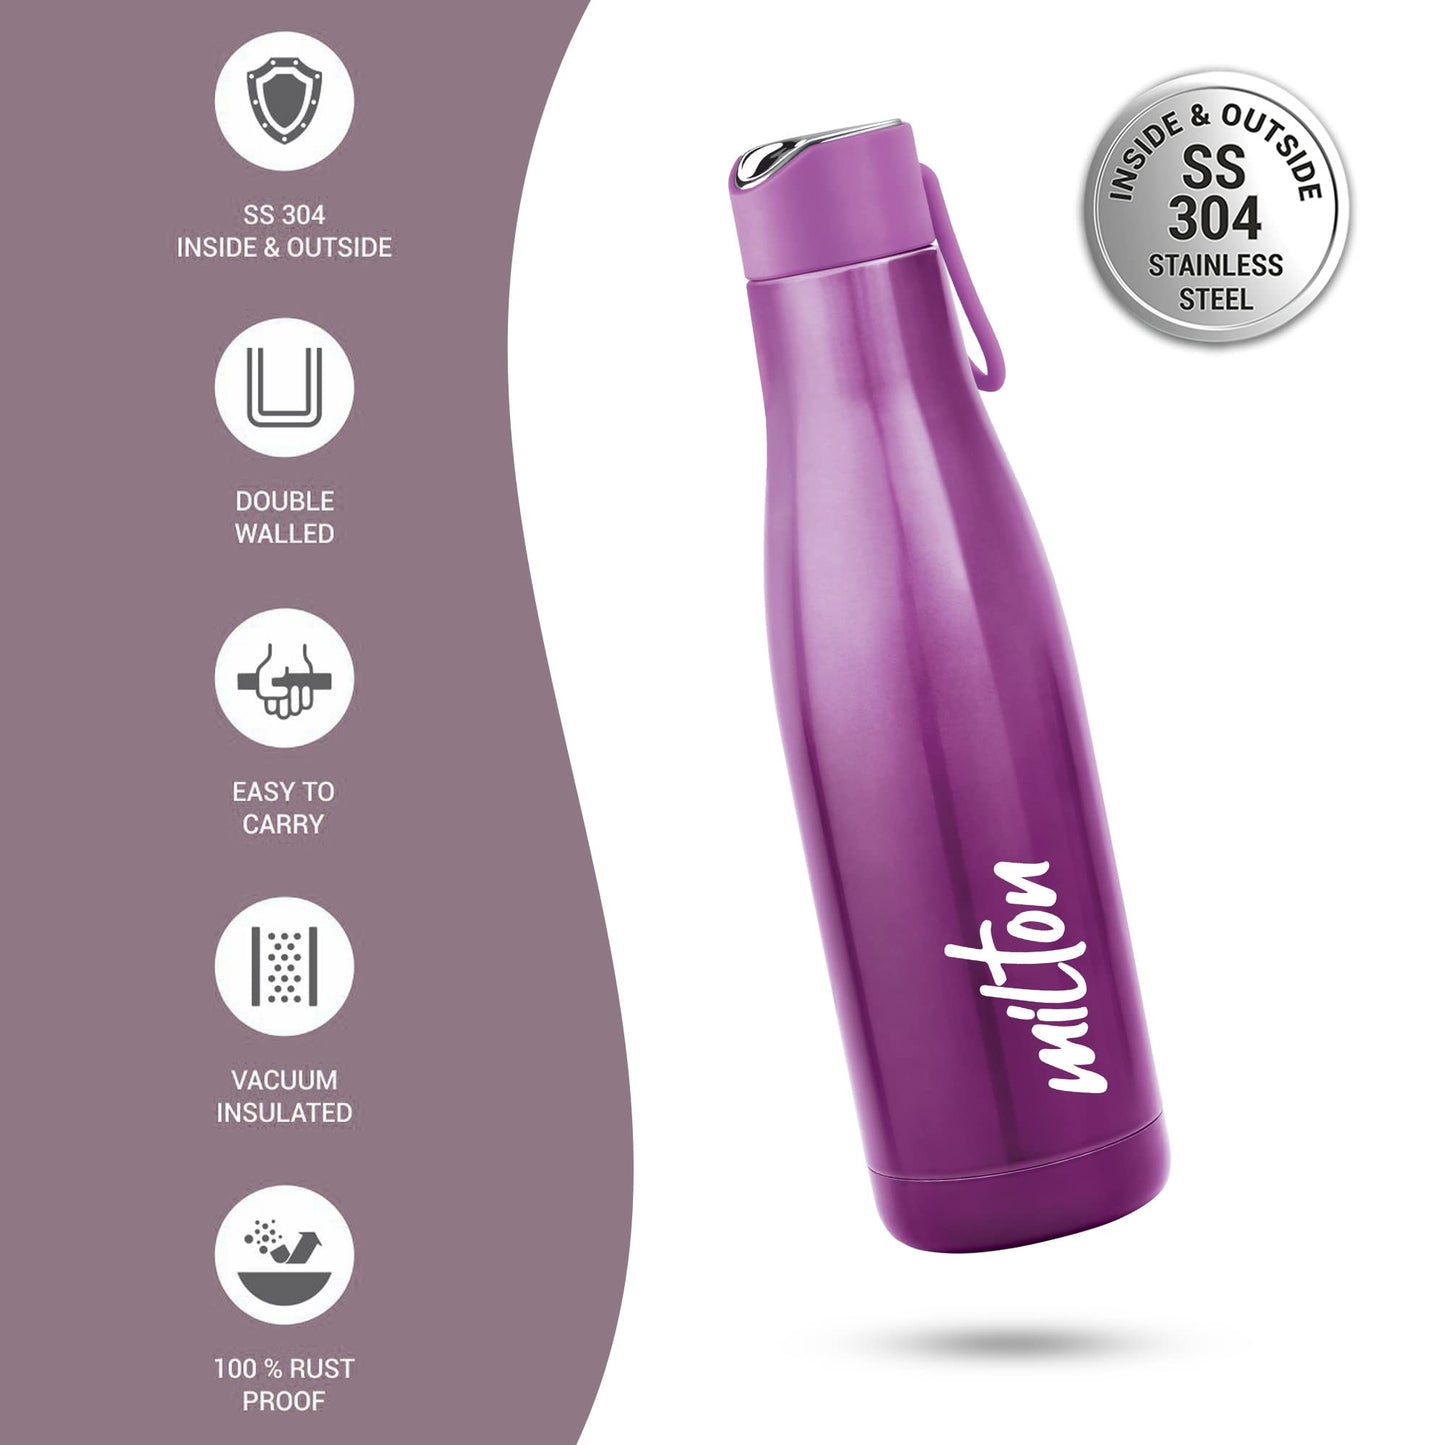 Milton Fame 800 Thermosteel Vacuum Insulated Stainless Steel 24 Hours Hot and Cold Water Bottle, 760 ml, Purple